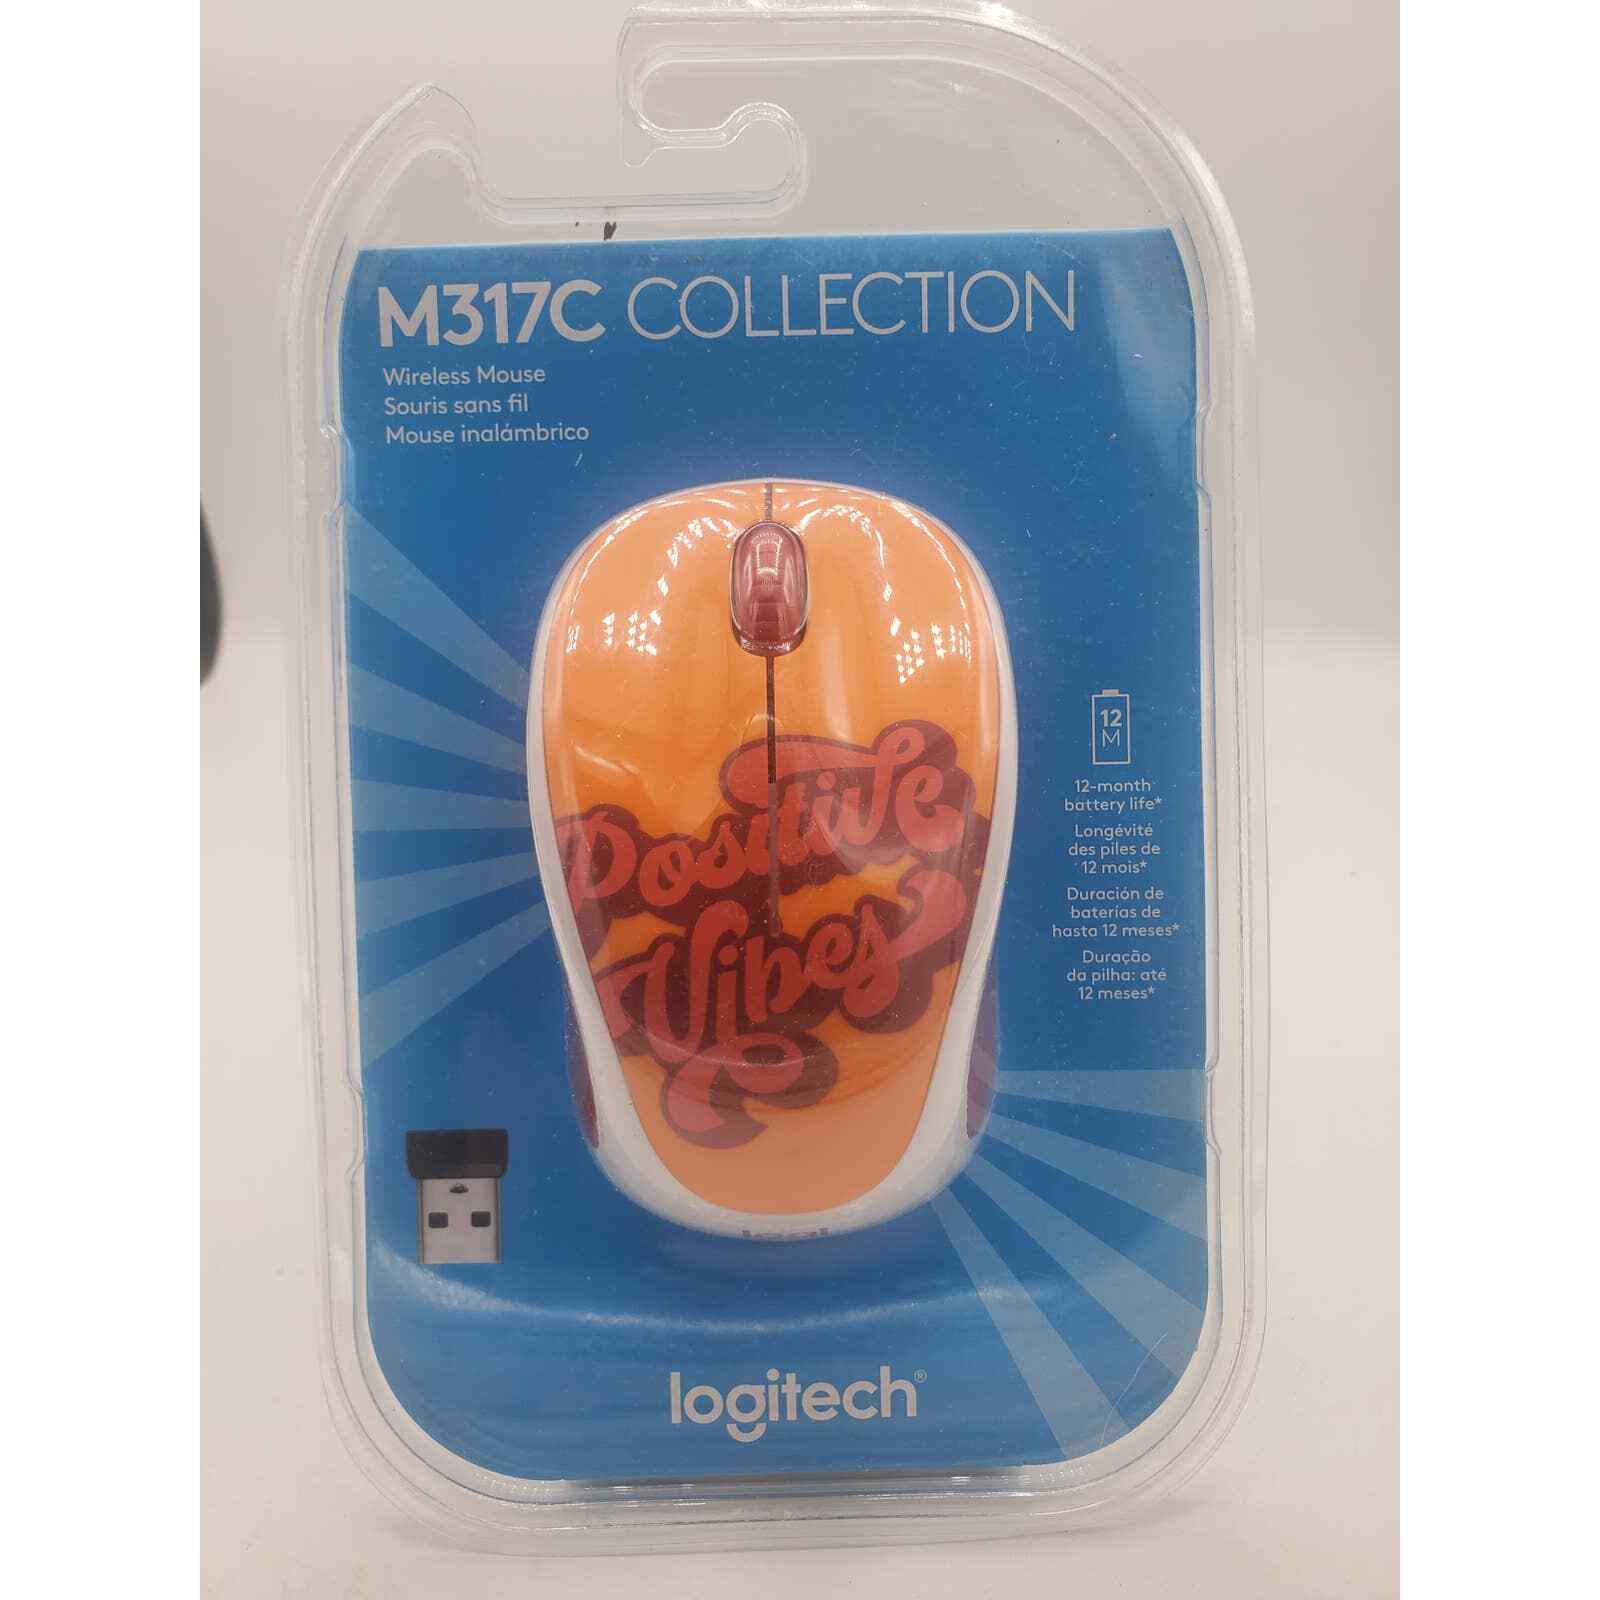 BRAND NEW Logitech M317C Collection Wireless Orange Mouse Positive Vibes